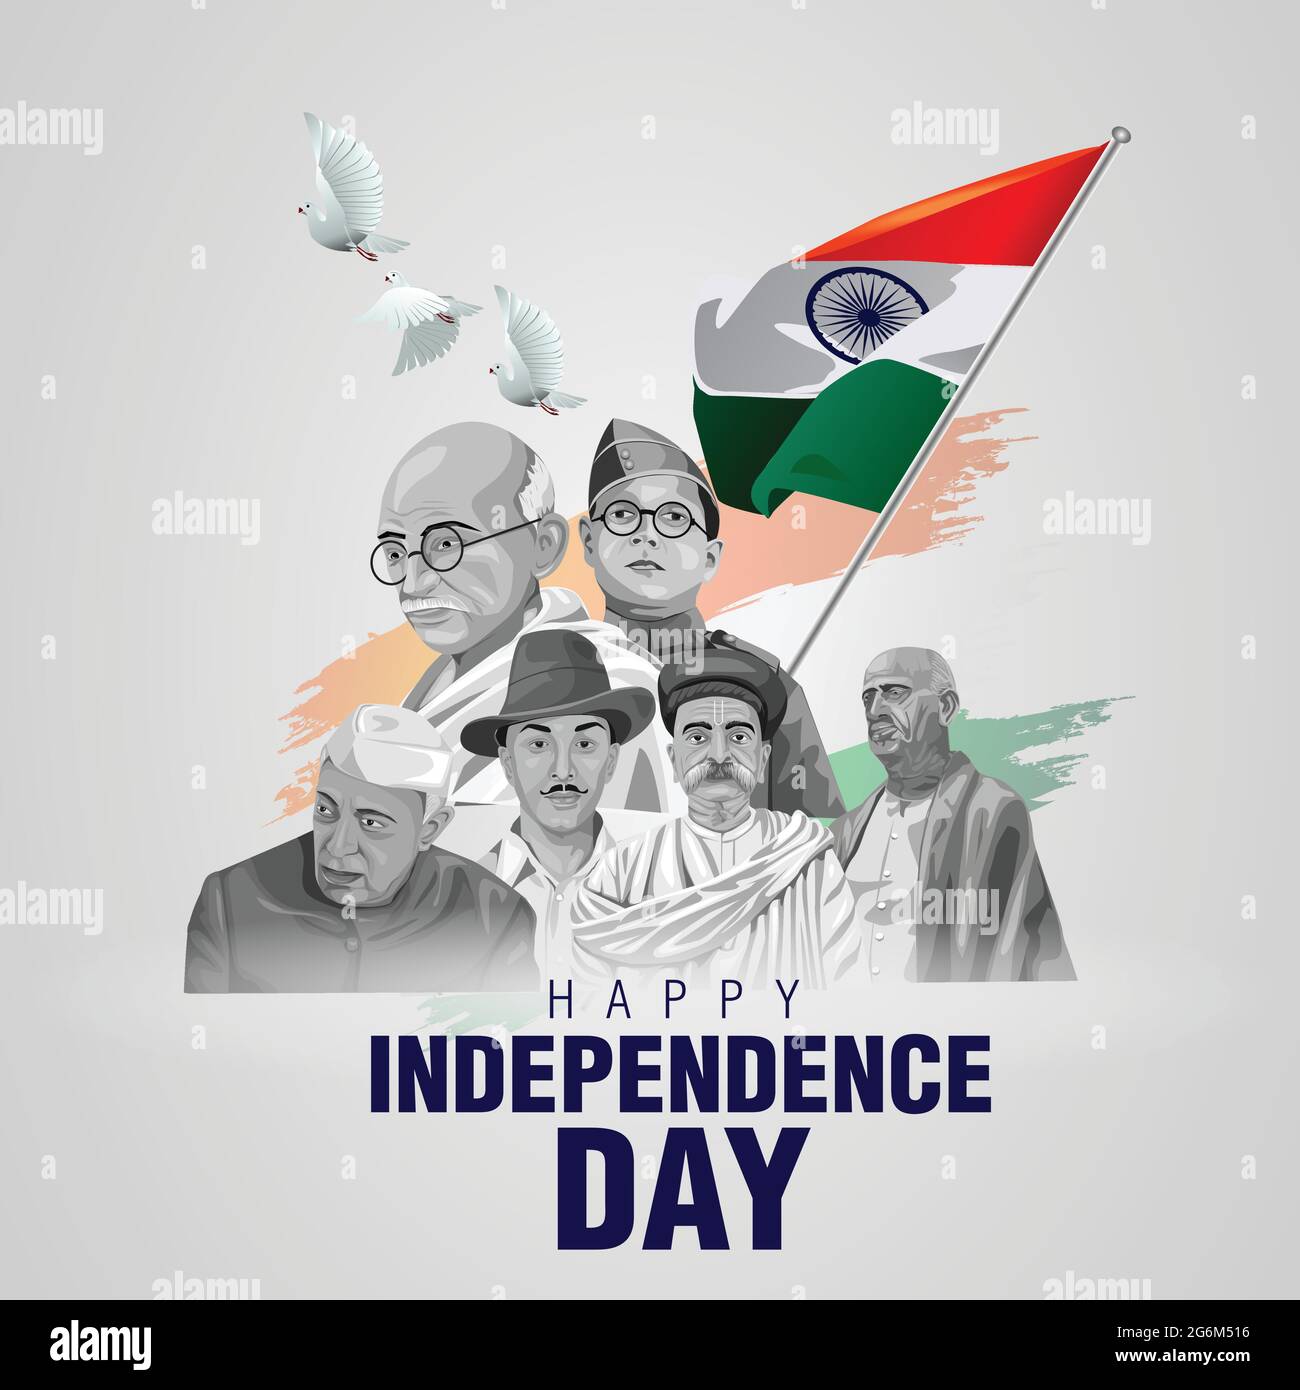 happy independence day India 15th august with Indian freedom fighters ...